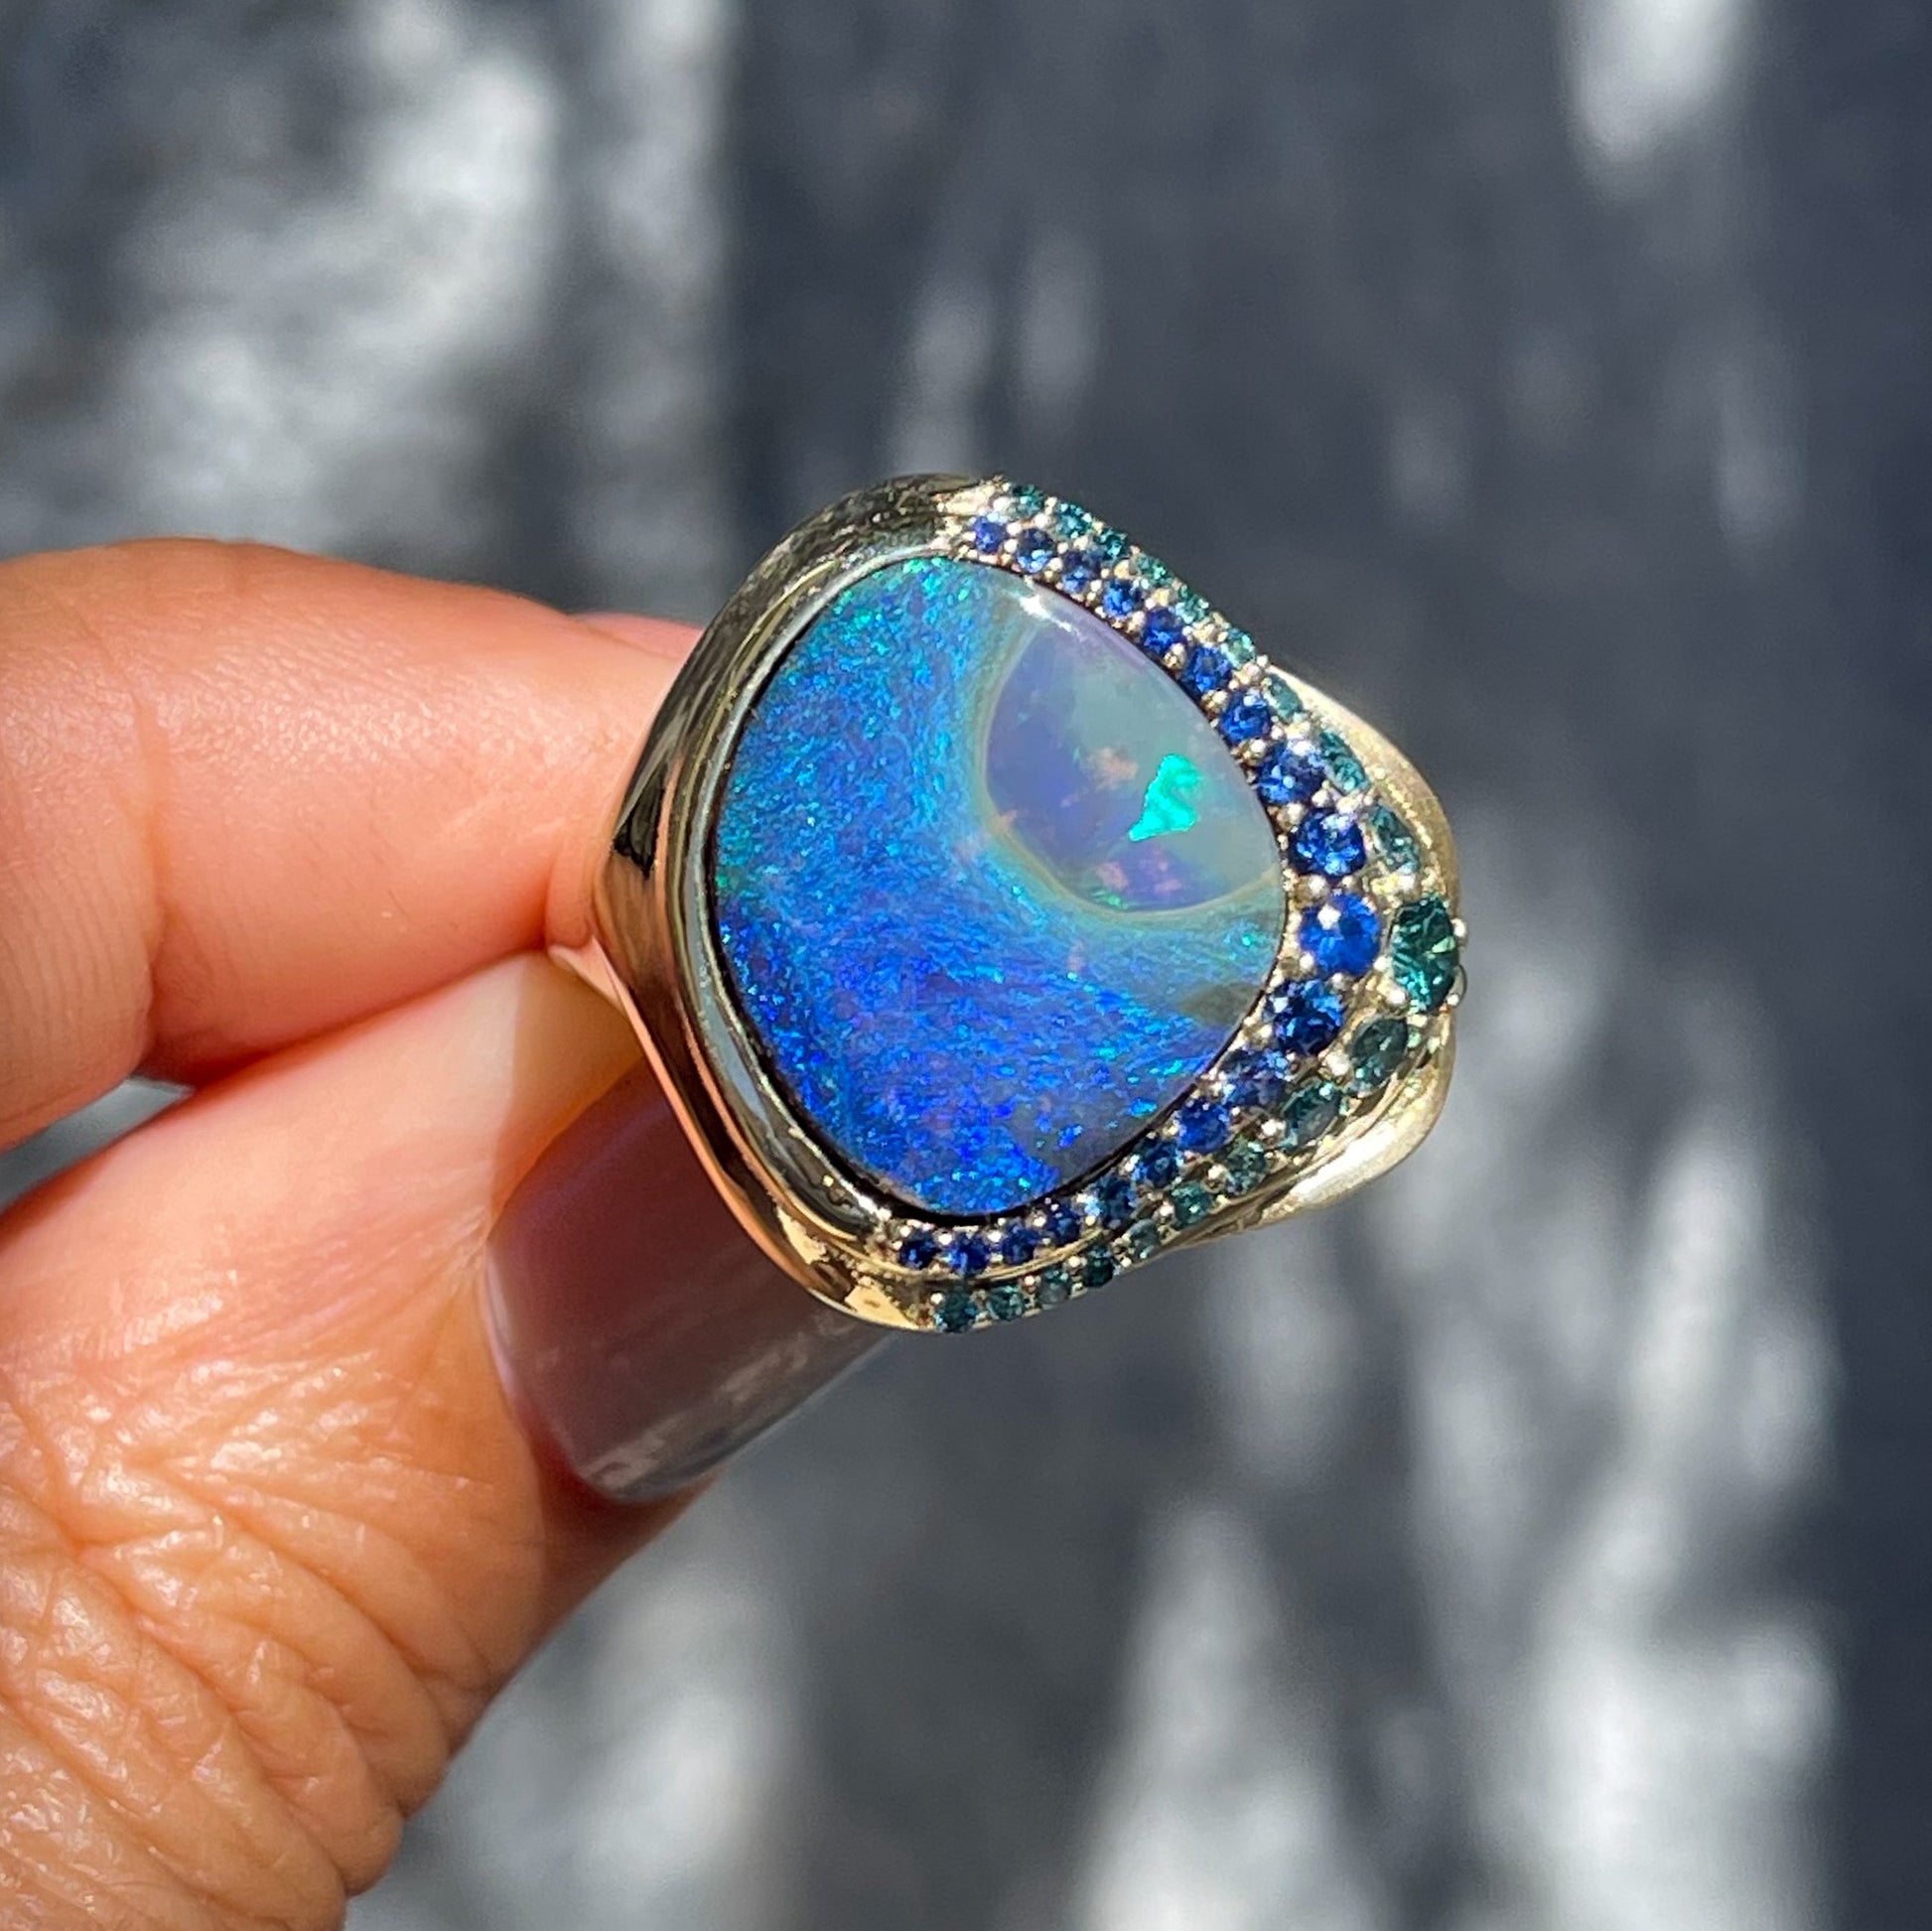 Australian Opal Ring by NIXIN Jewelry held in sun. Gold opal ring with sapphires and diamonds.